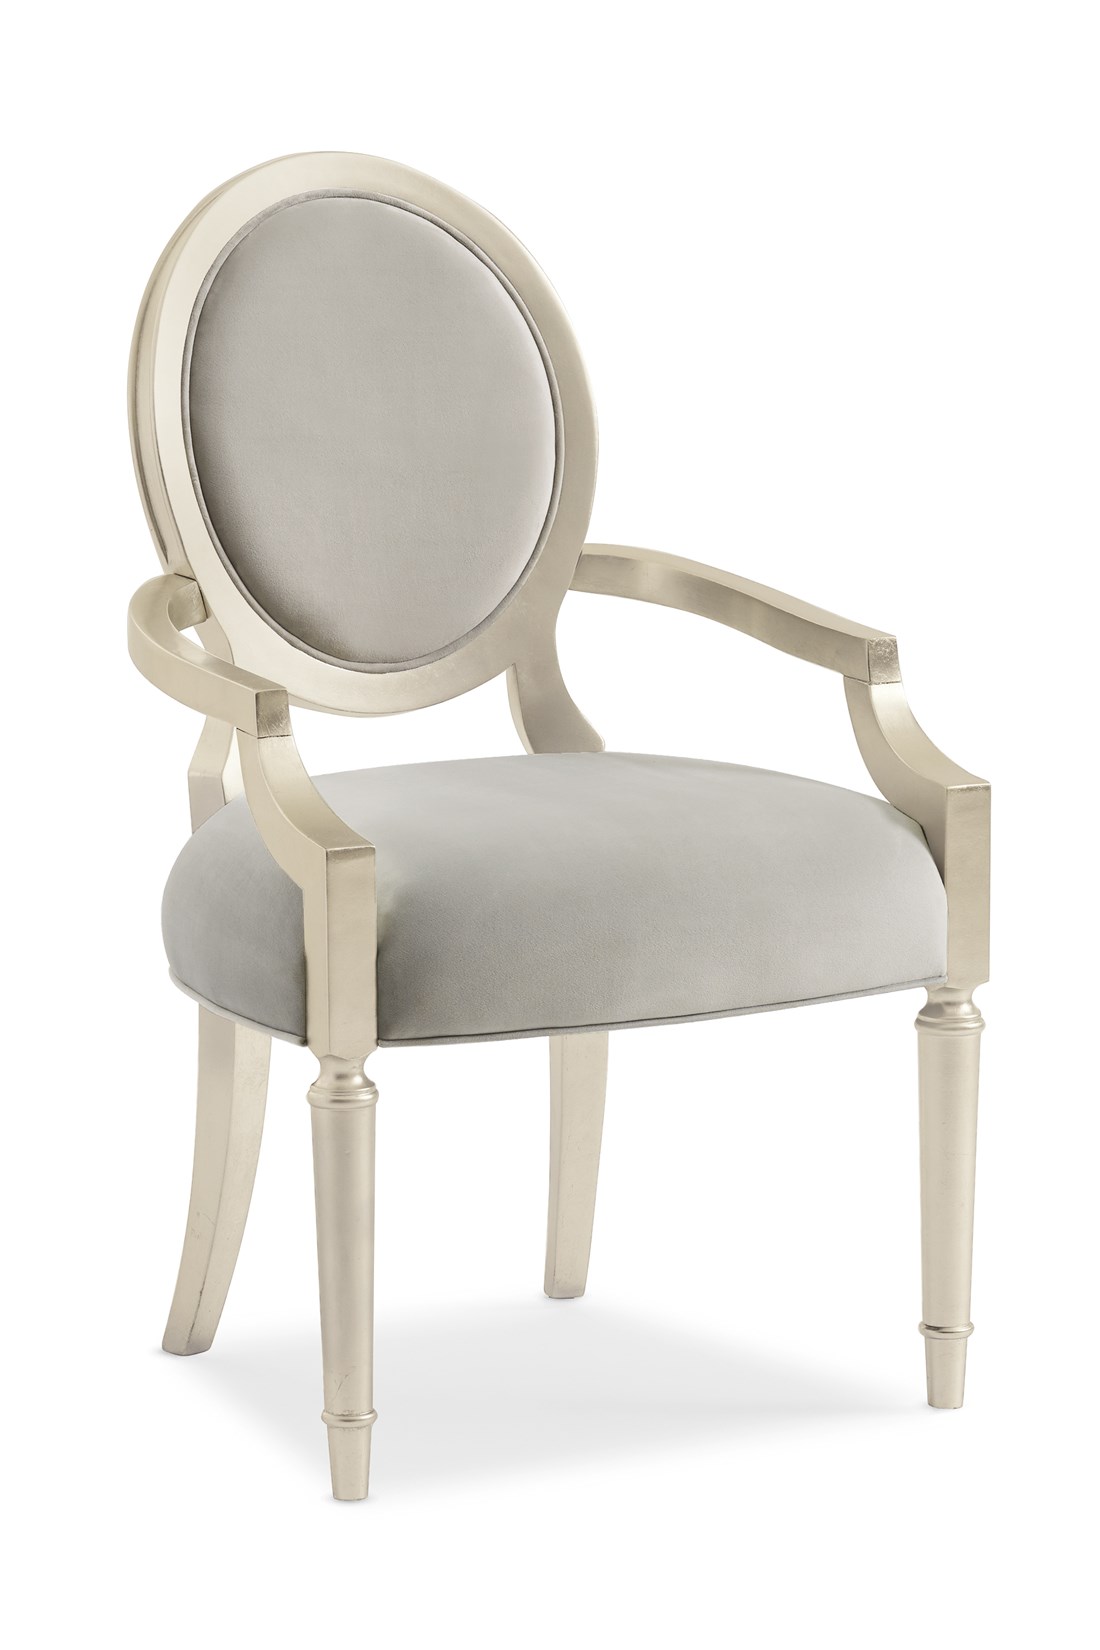 Chit-Chat Chair - Powell & Bonnell